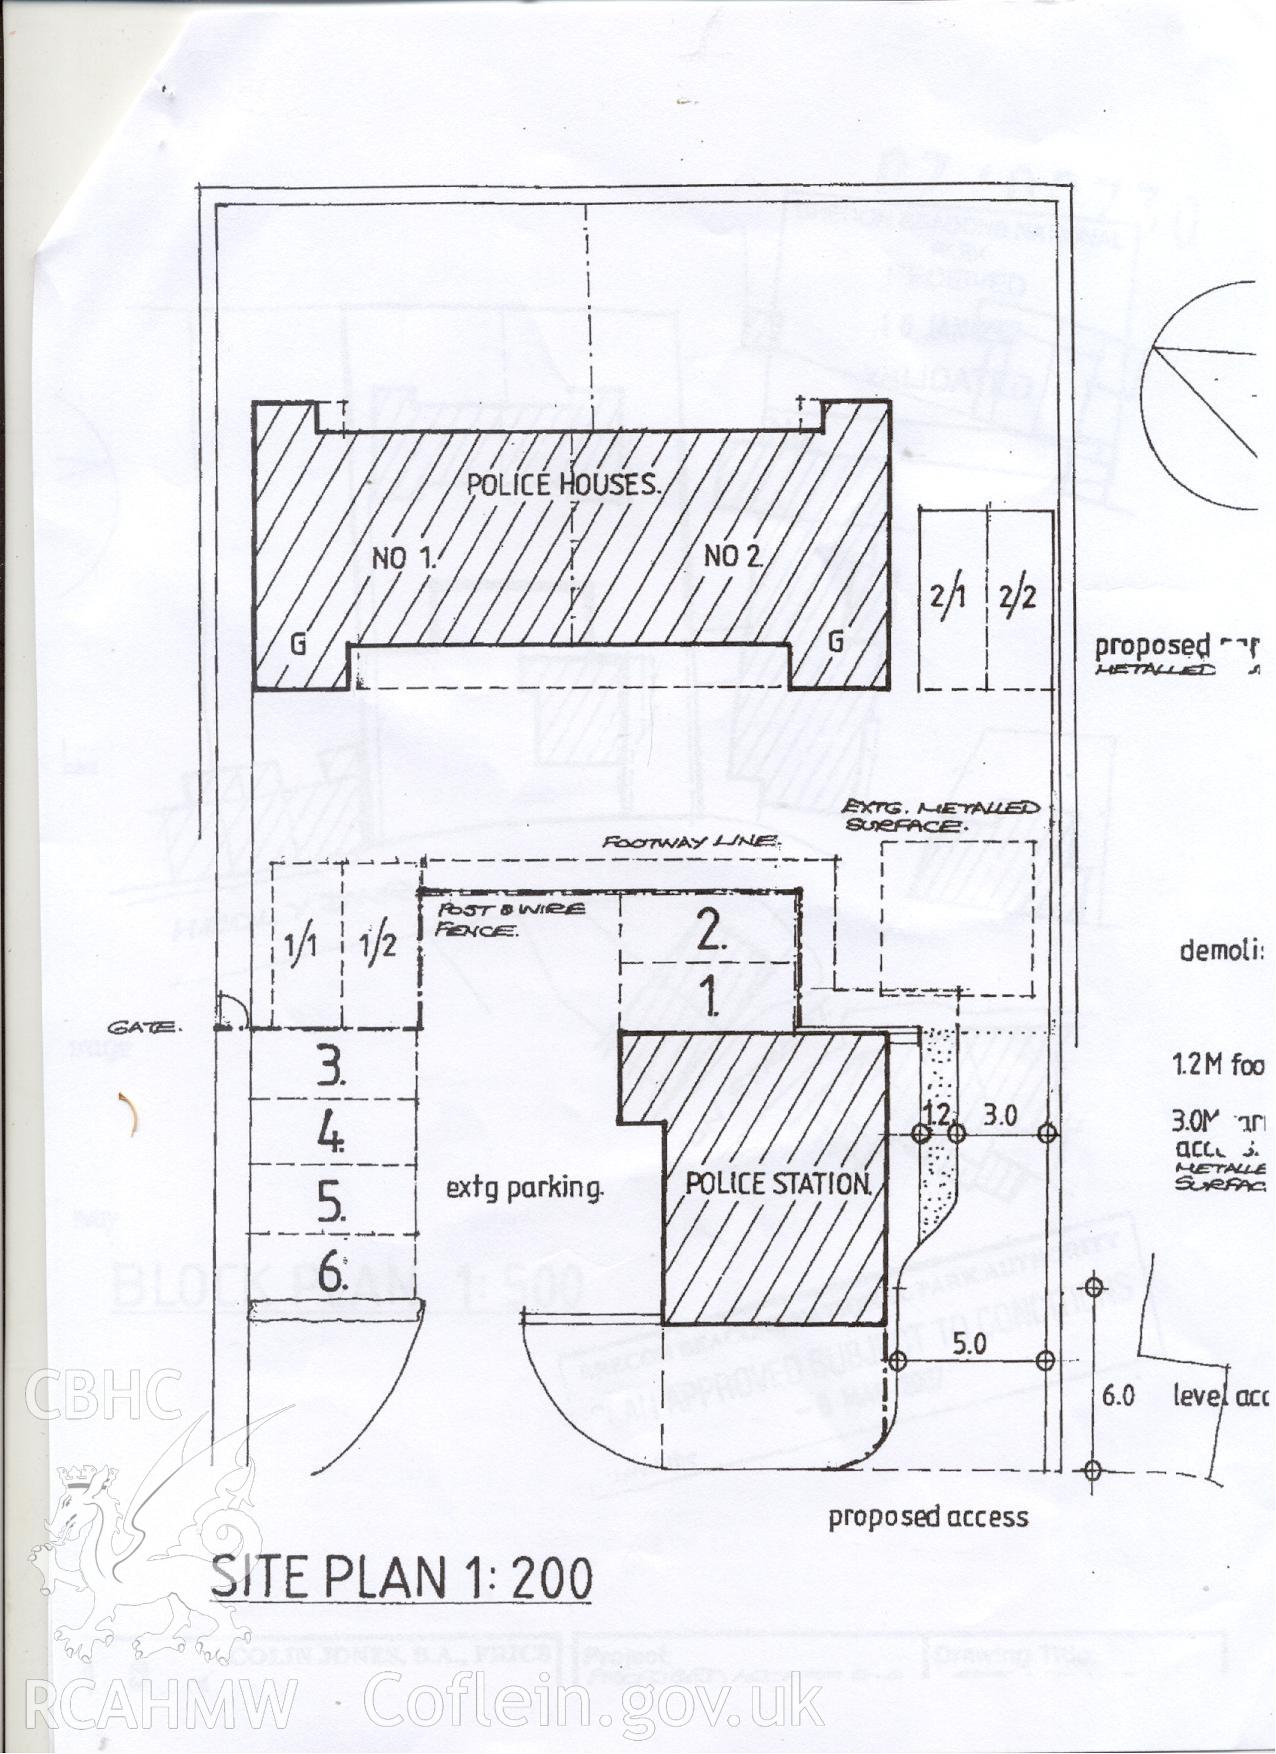 Electronic copy of a site plan relating to an archaeological watching brief on Police Houses 1-2, Heol y Dwr, Hay on Wye. Produced by Cambrian Archaeological Projects Ltd: CAP Report No. 489, Project No. 880.